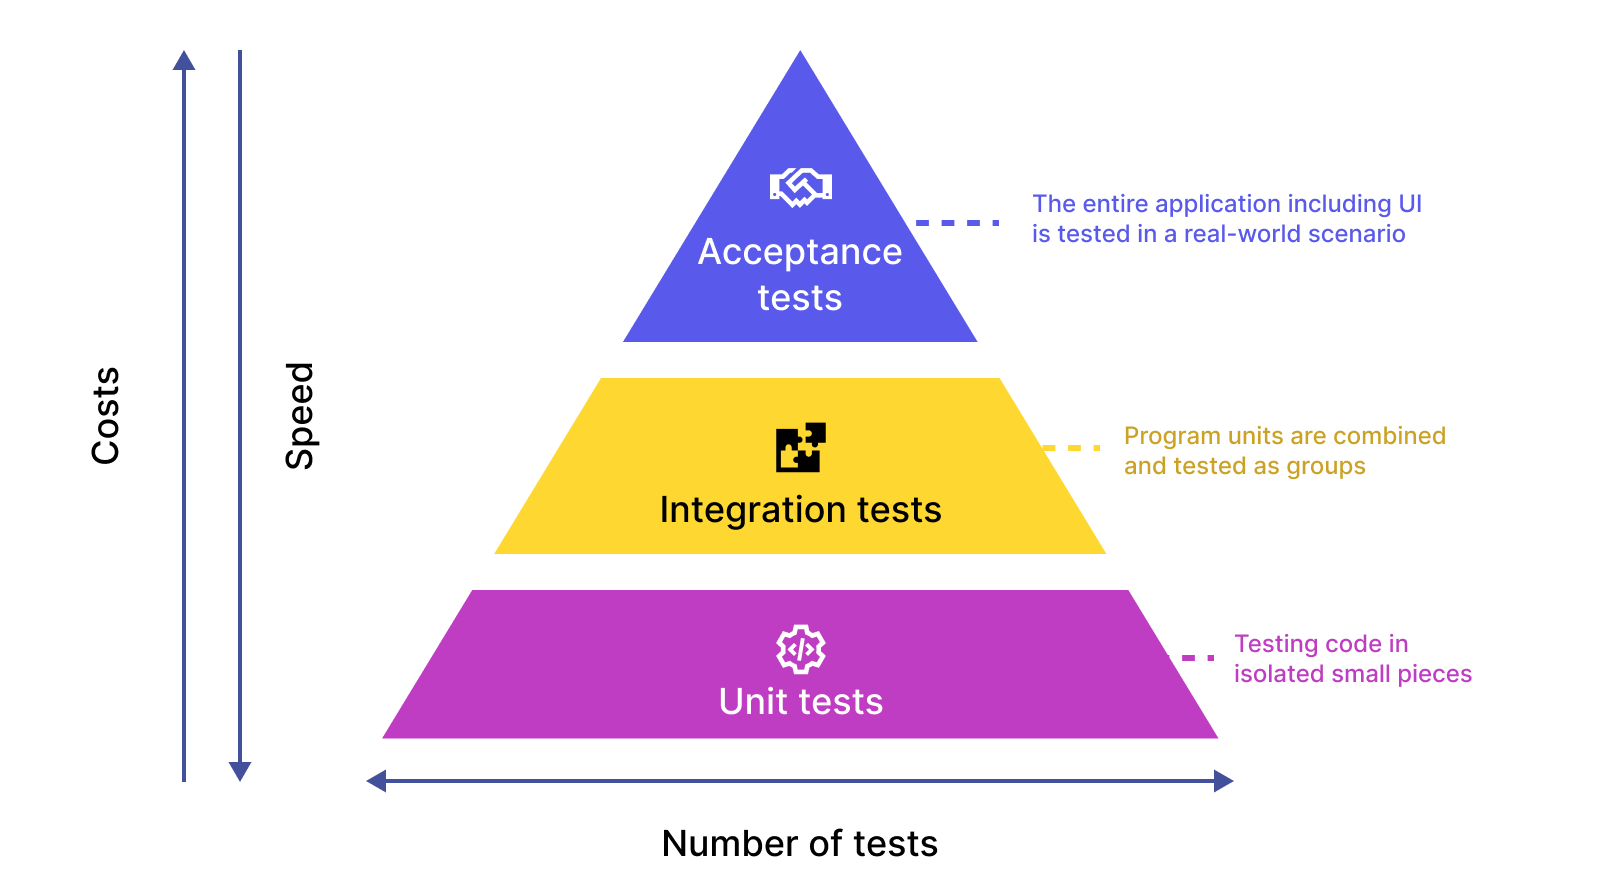 number of tests required for unit testing